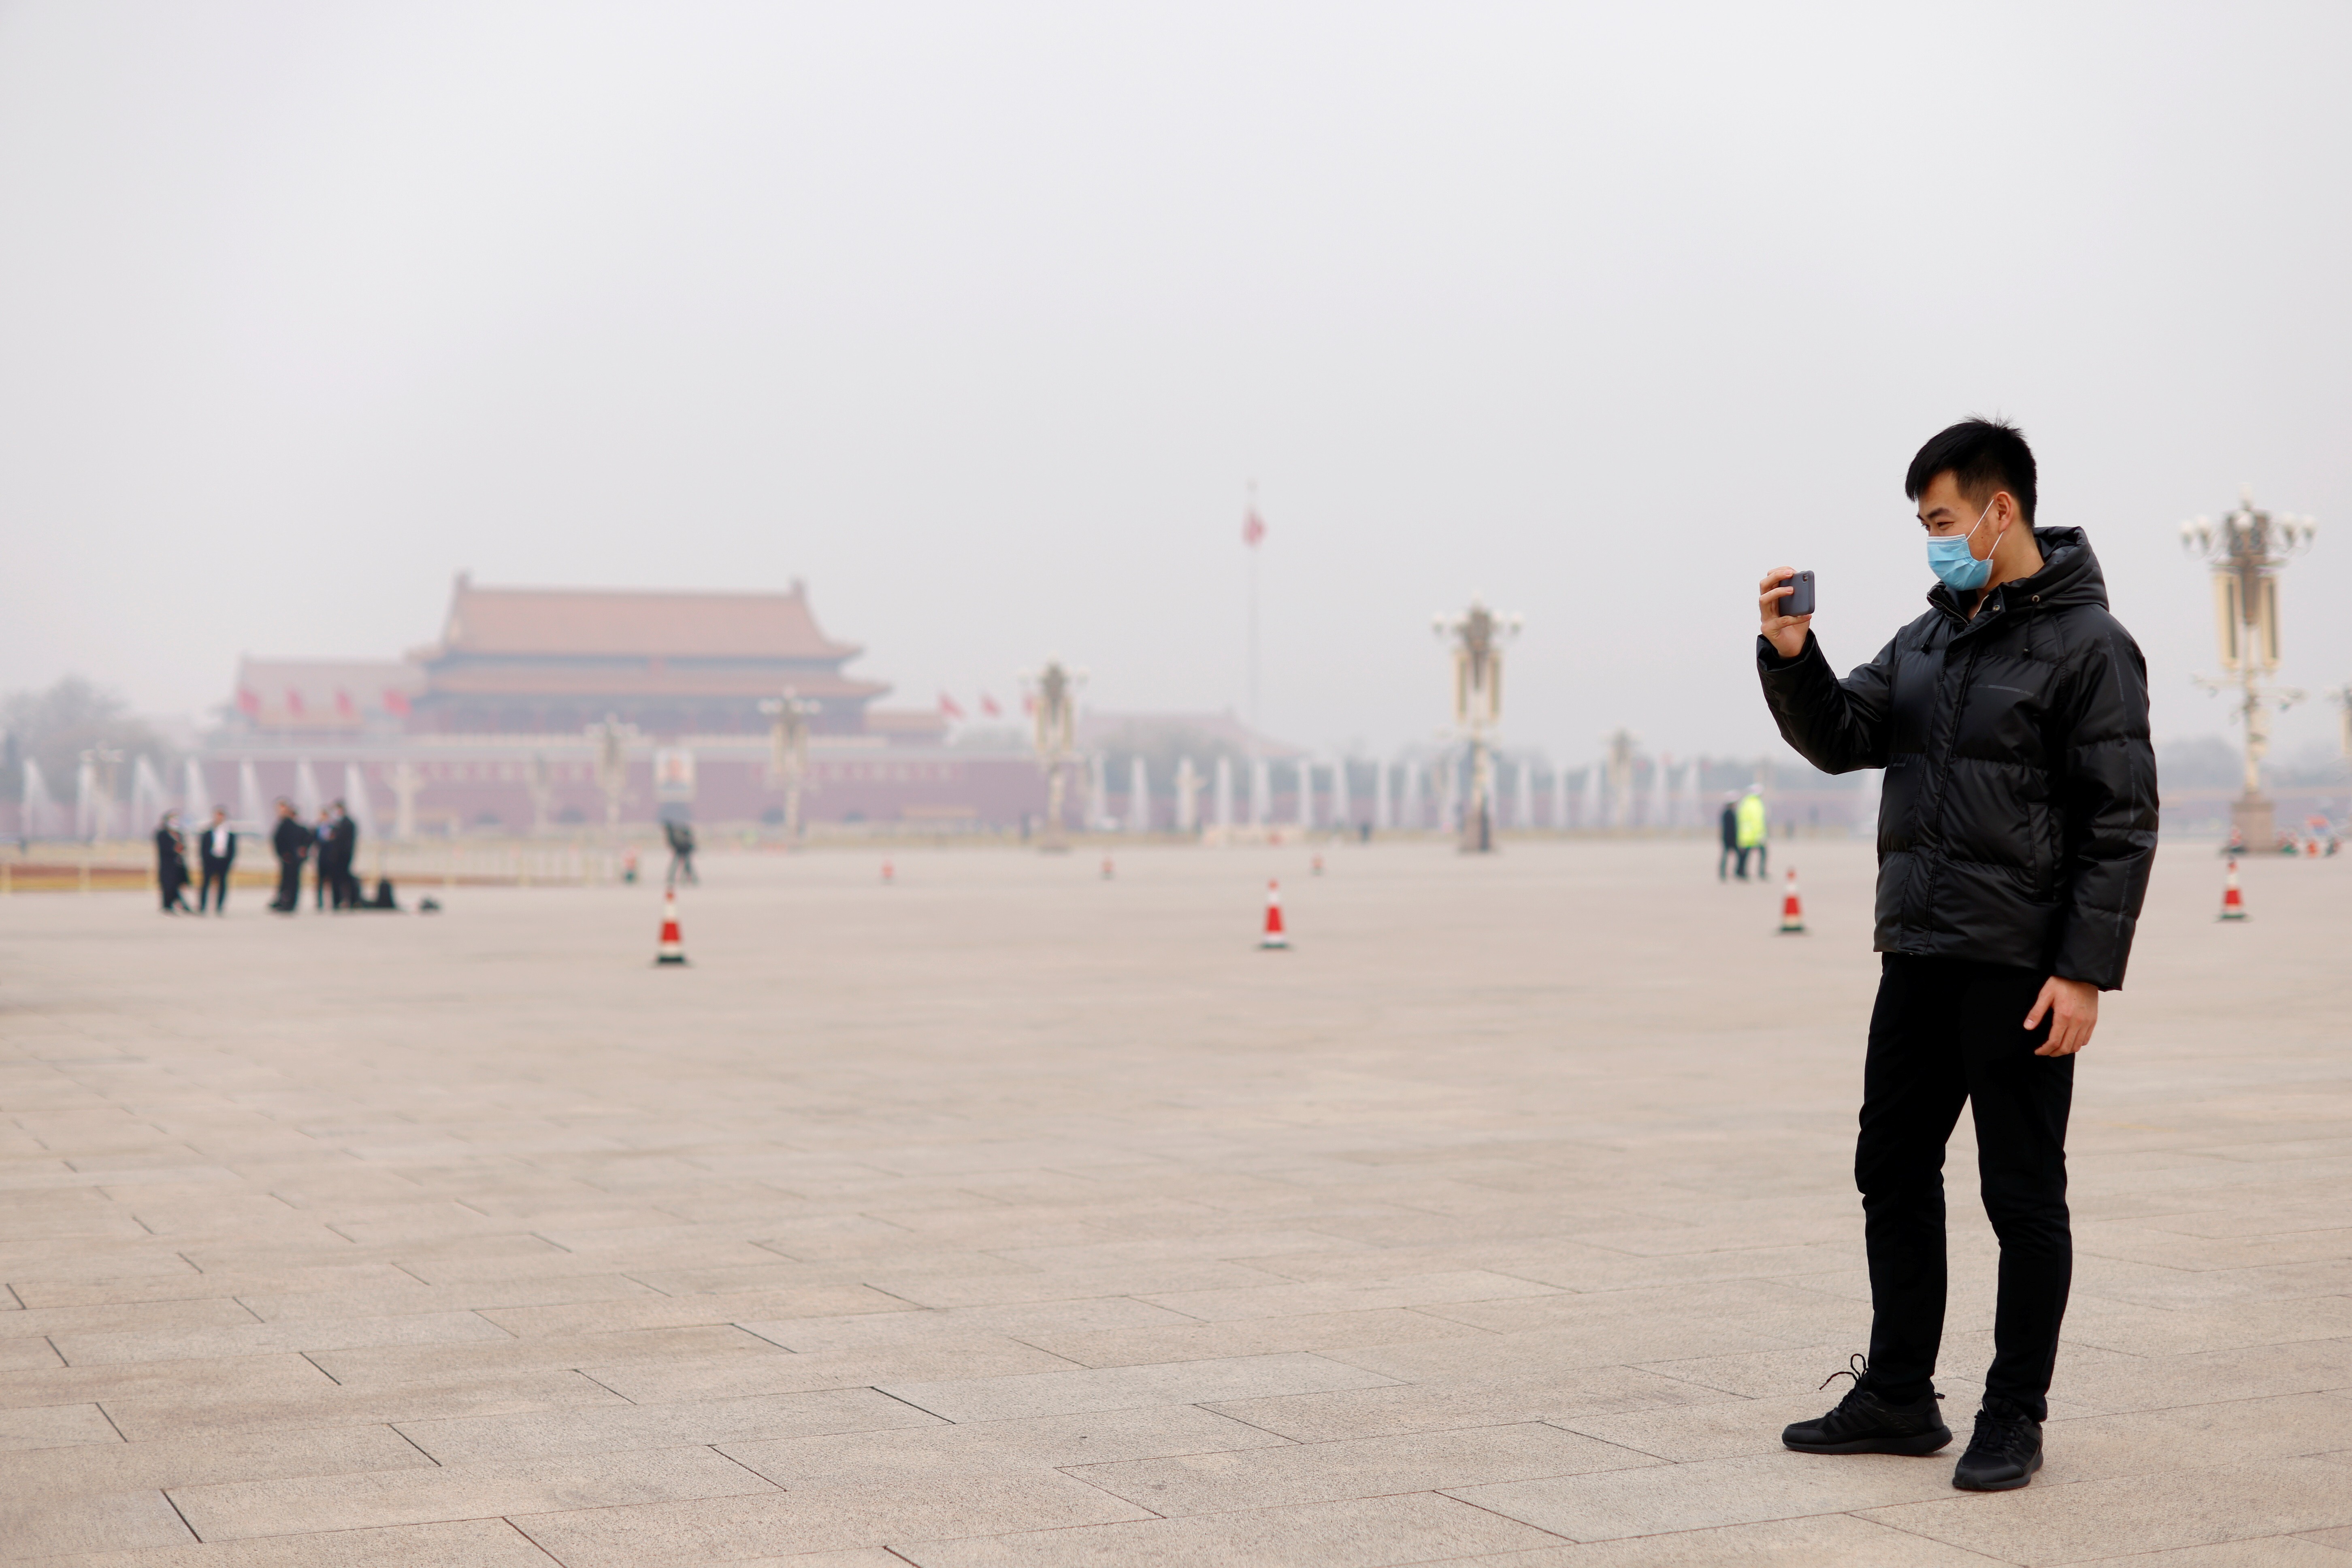 A man in Tiananmen Square holds his mobile phone while shrouded in smog, before the closing session of the Chinese People's Political Consultative Conference (CPPCC) at the Great Hall of the People on a polluted day in Beijing, China on March 10, 2021. Photo: Reuters